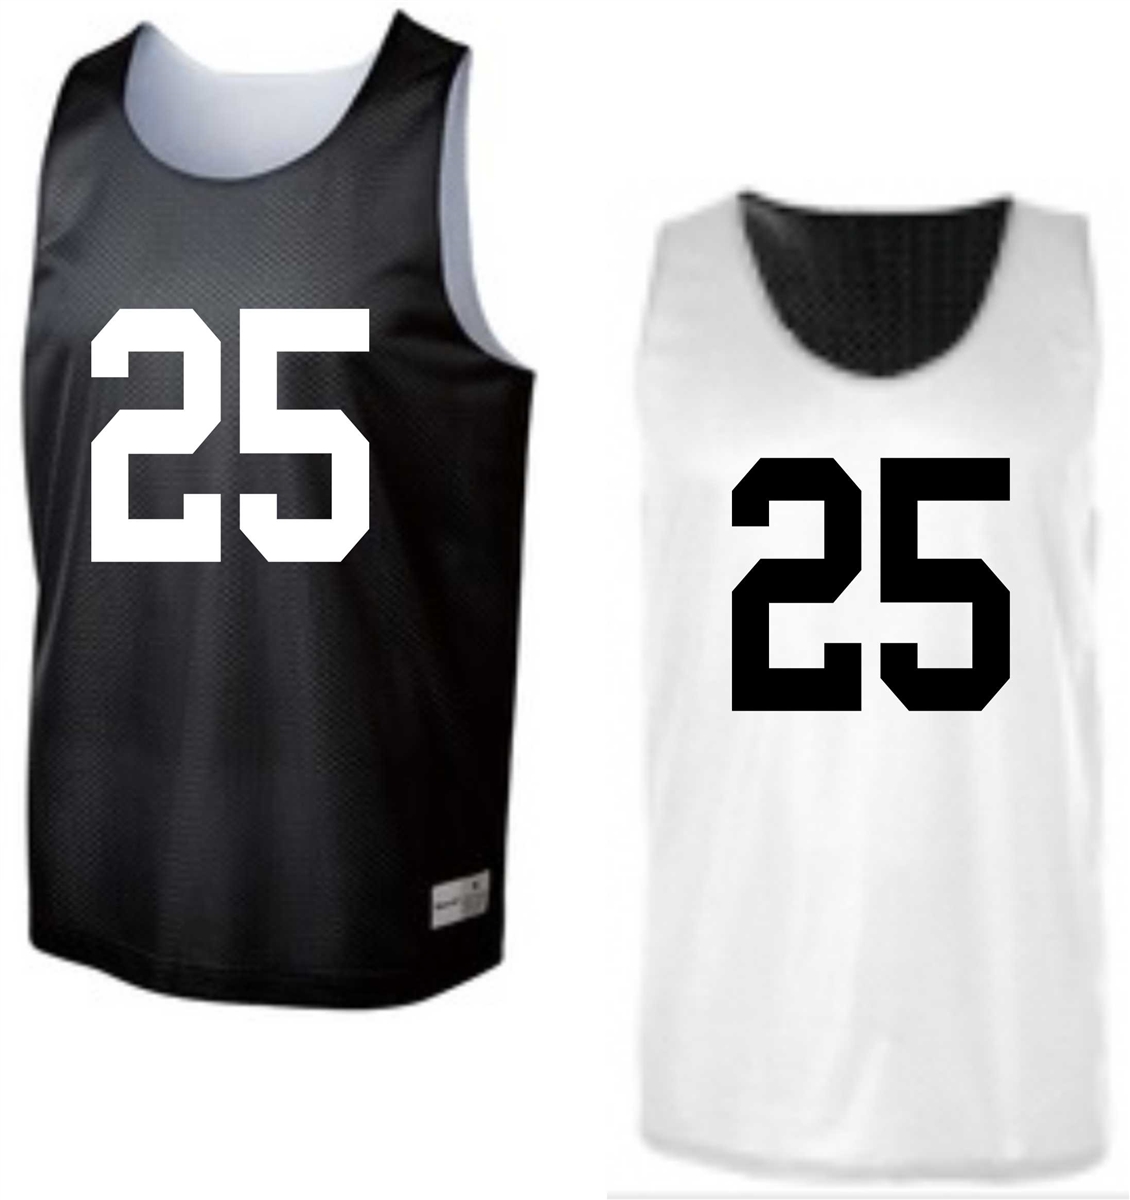 Reversible Scrimmage Vests | Pinnies | Customization and Numbering  Available | Soccer Coaching Equipment and More!!